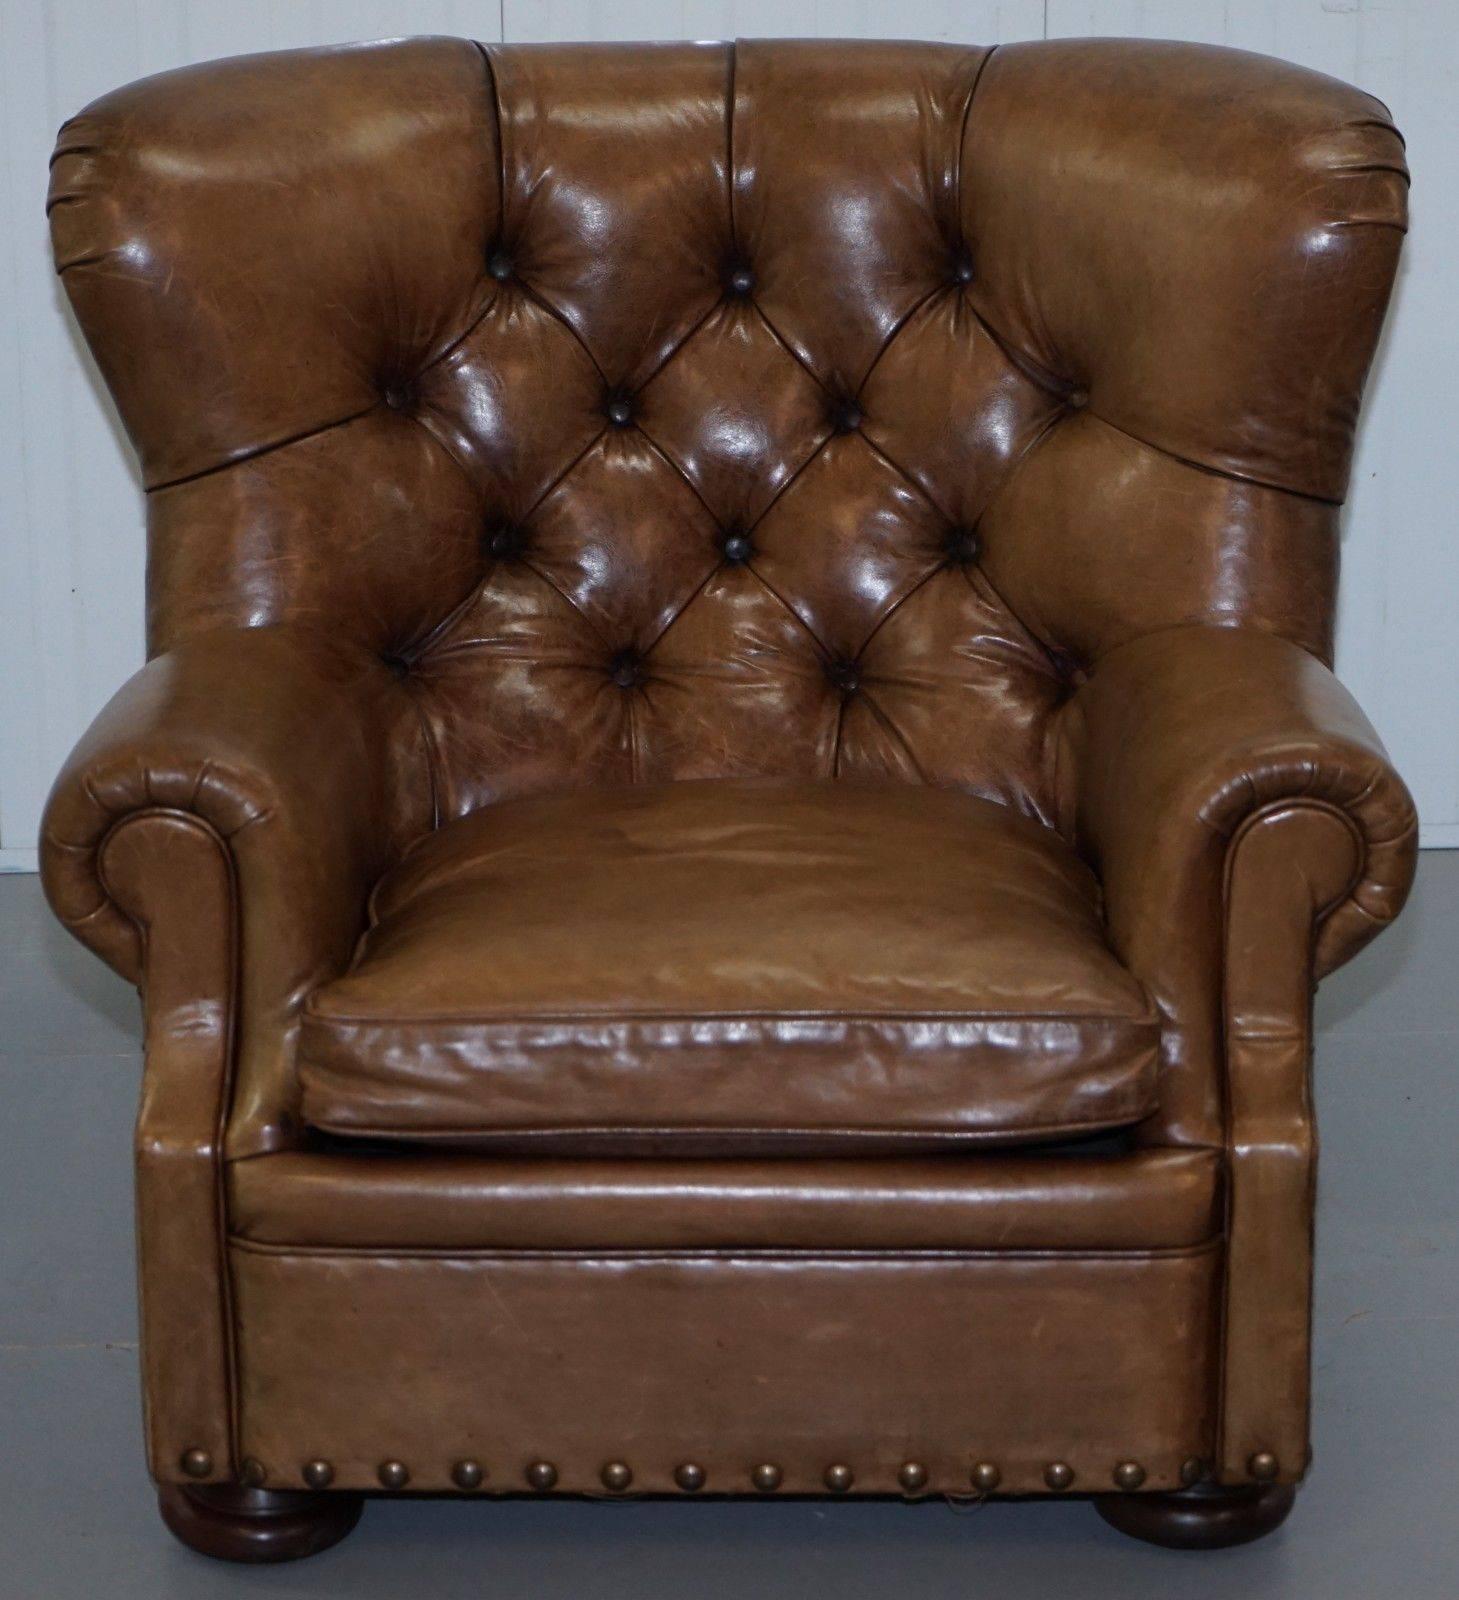 We are delighted to offer for sale this totally original Ralph Lauren Writers aged brown vintage leather armchair

A very good looking and well-made piece in lightly restored condition throughout, we have deep cleaned hand condition waxed and hand